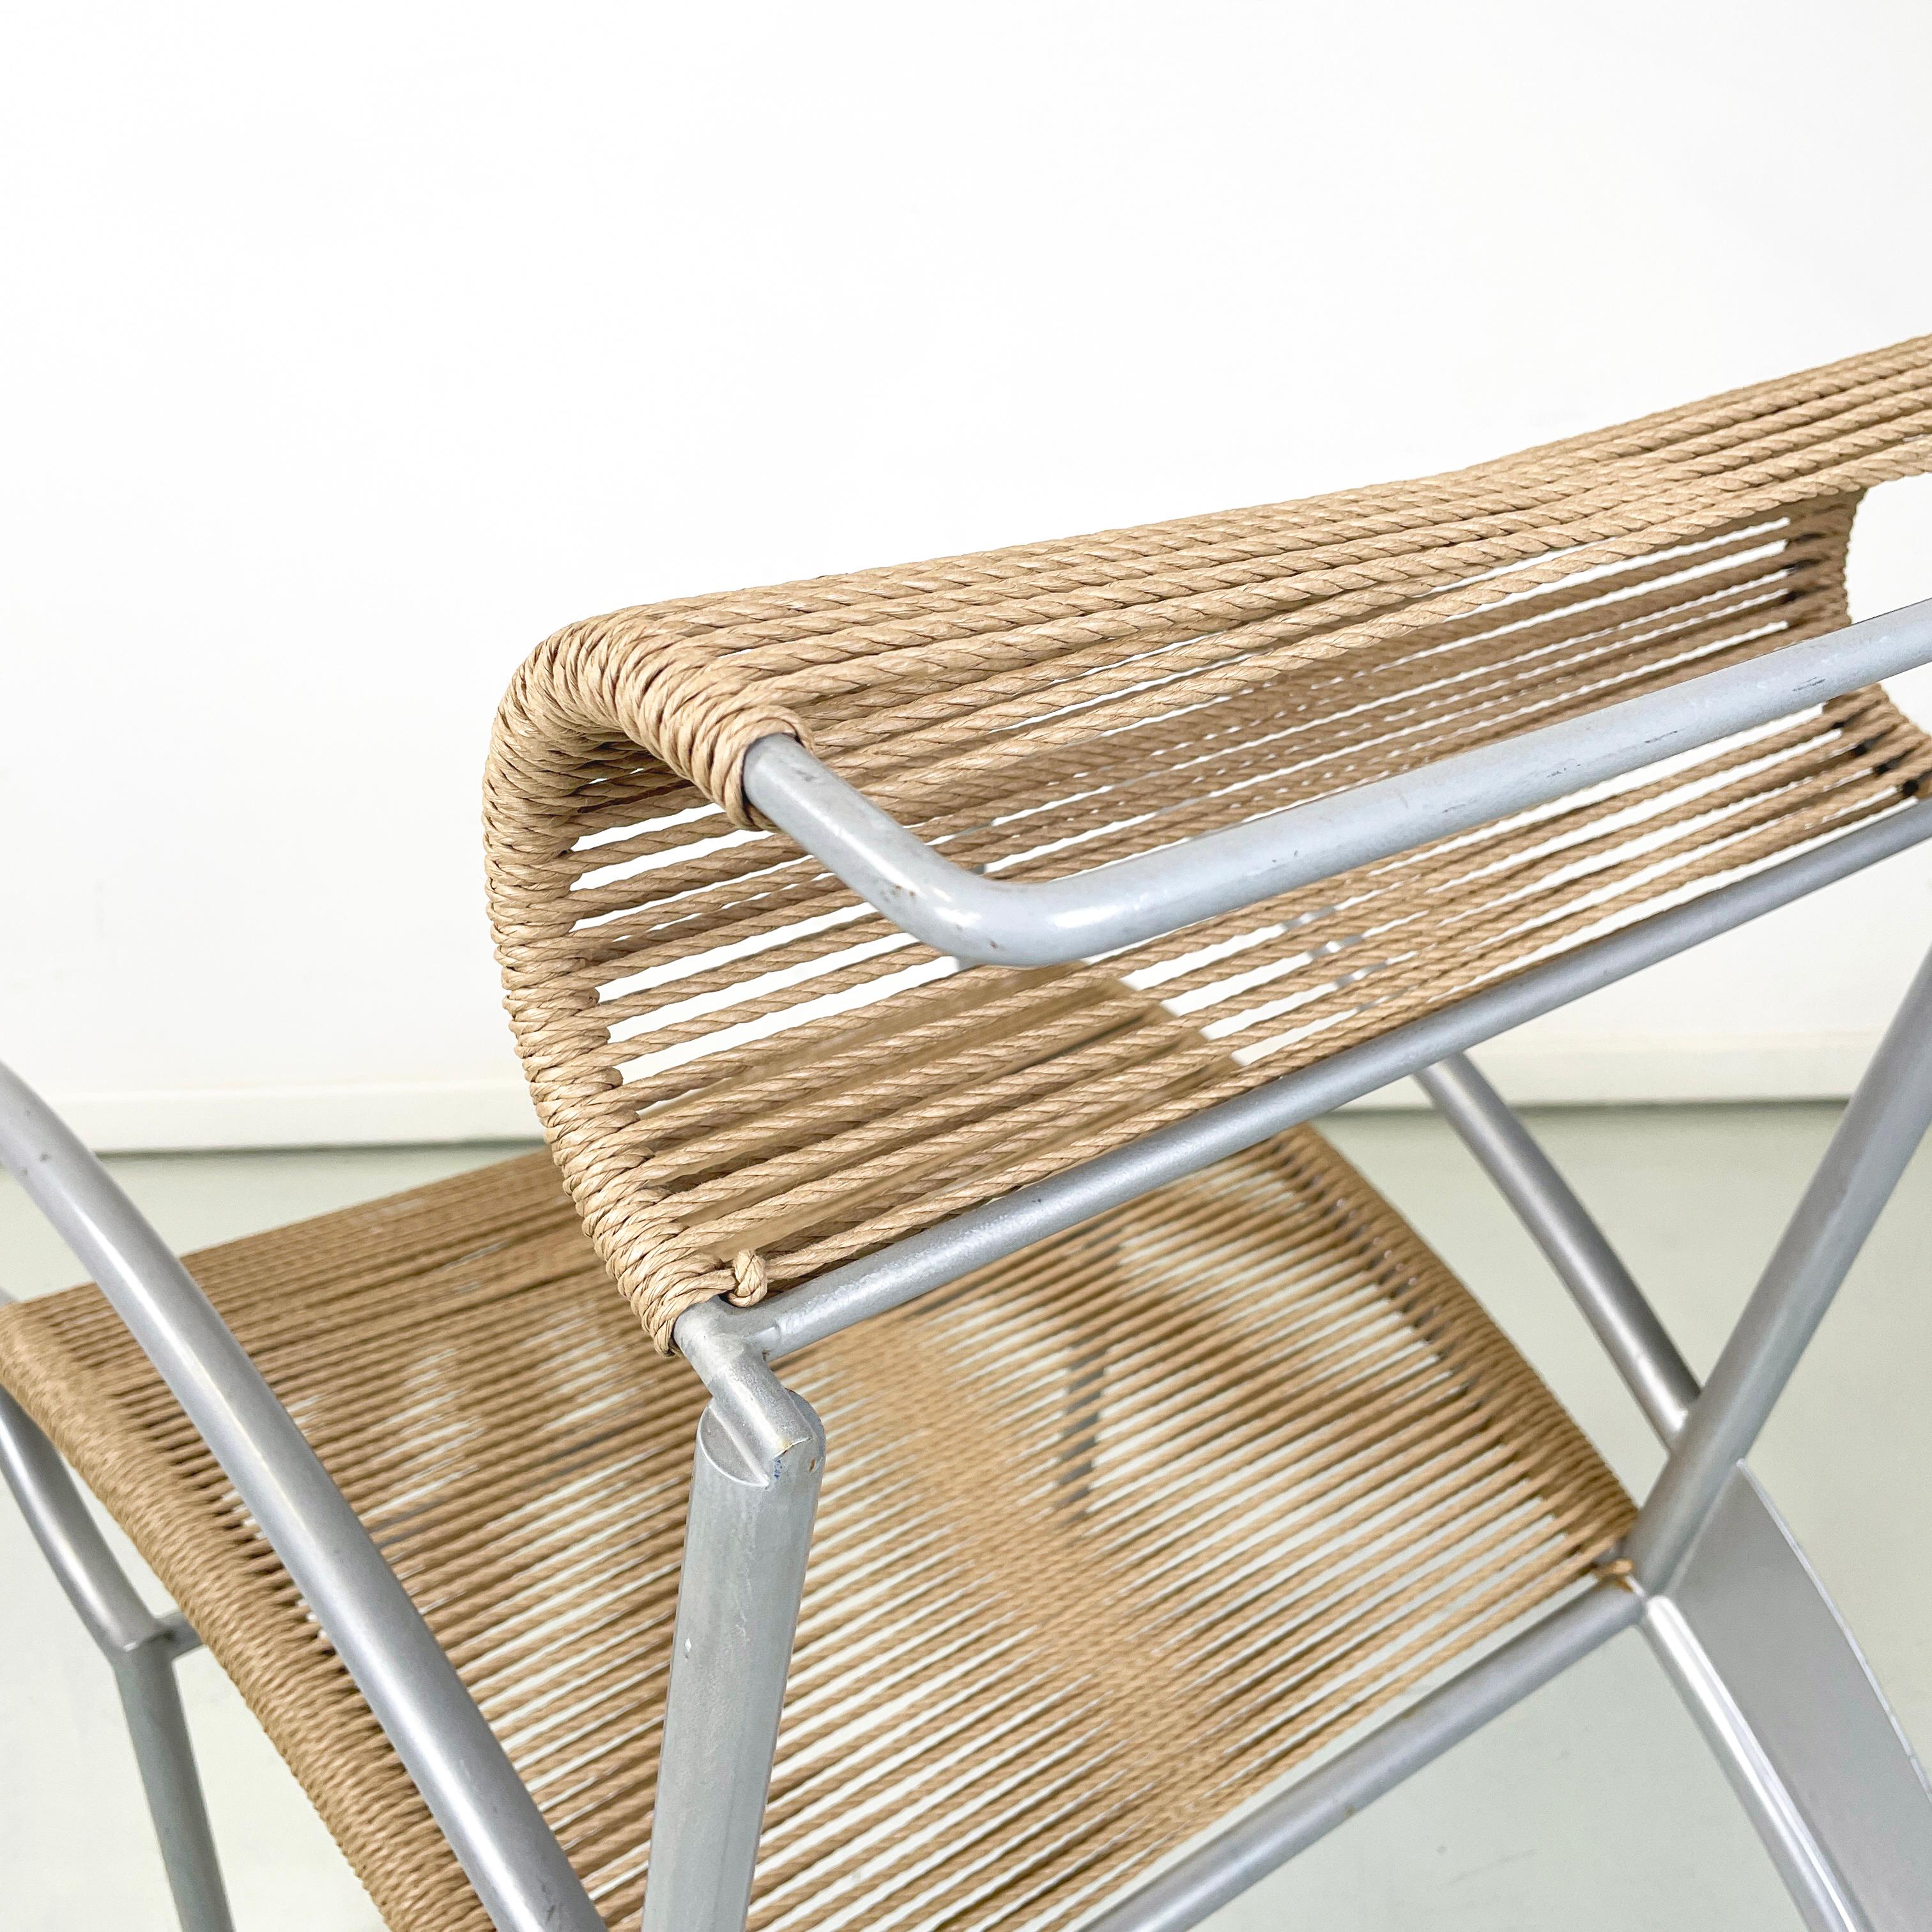 Italian modern rope and gray steel chair Juliette by Massimo Iosa-Ghini, 1990s For Sale 4